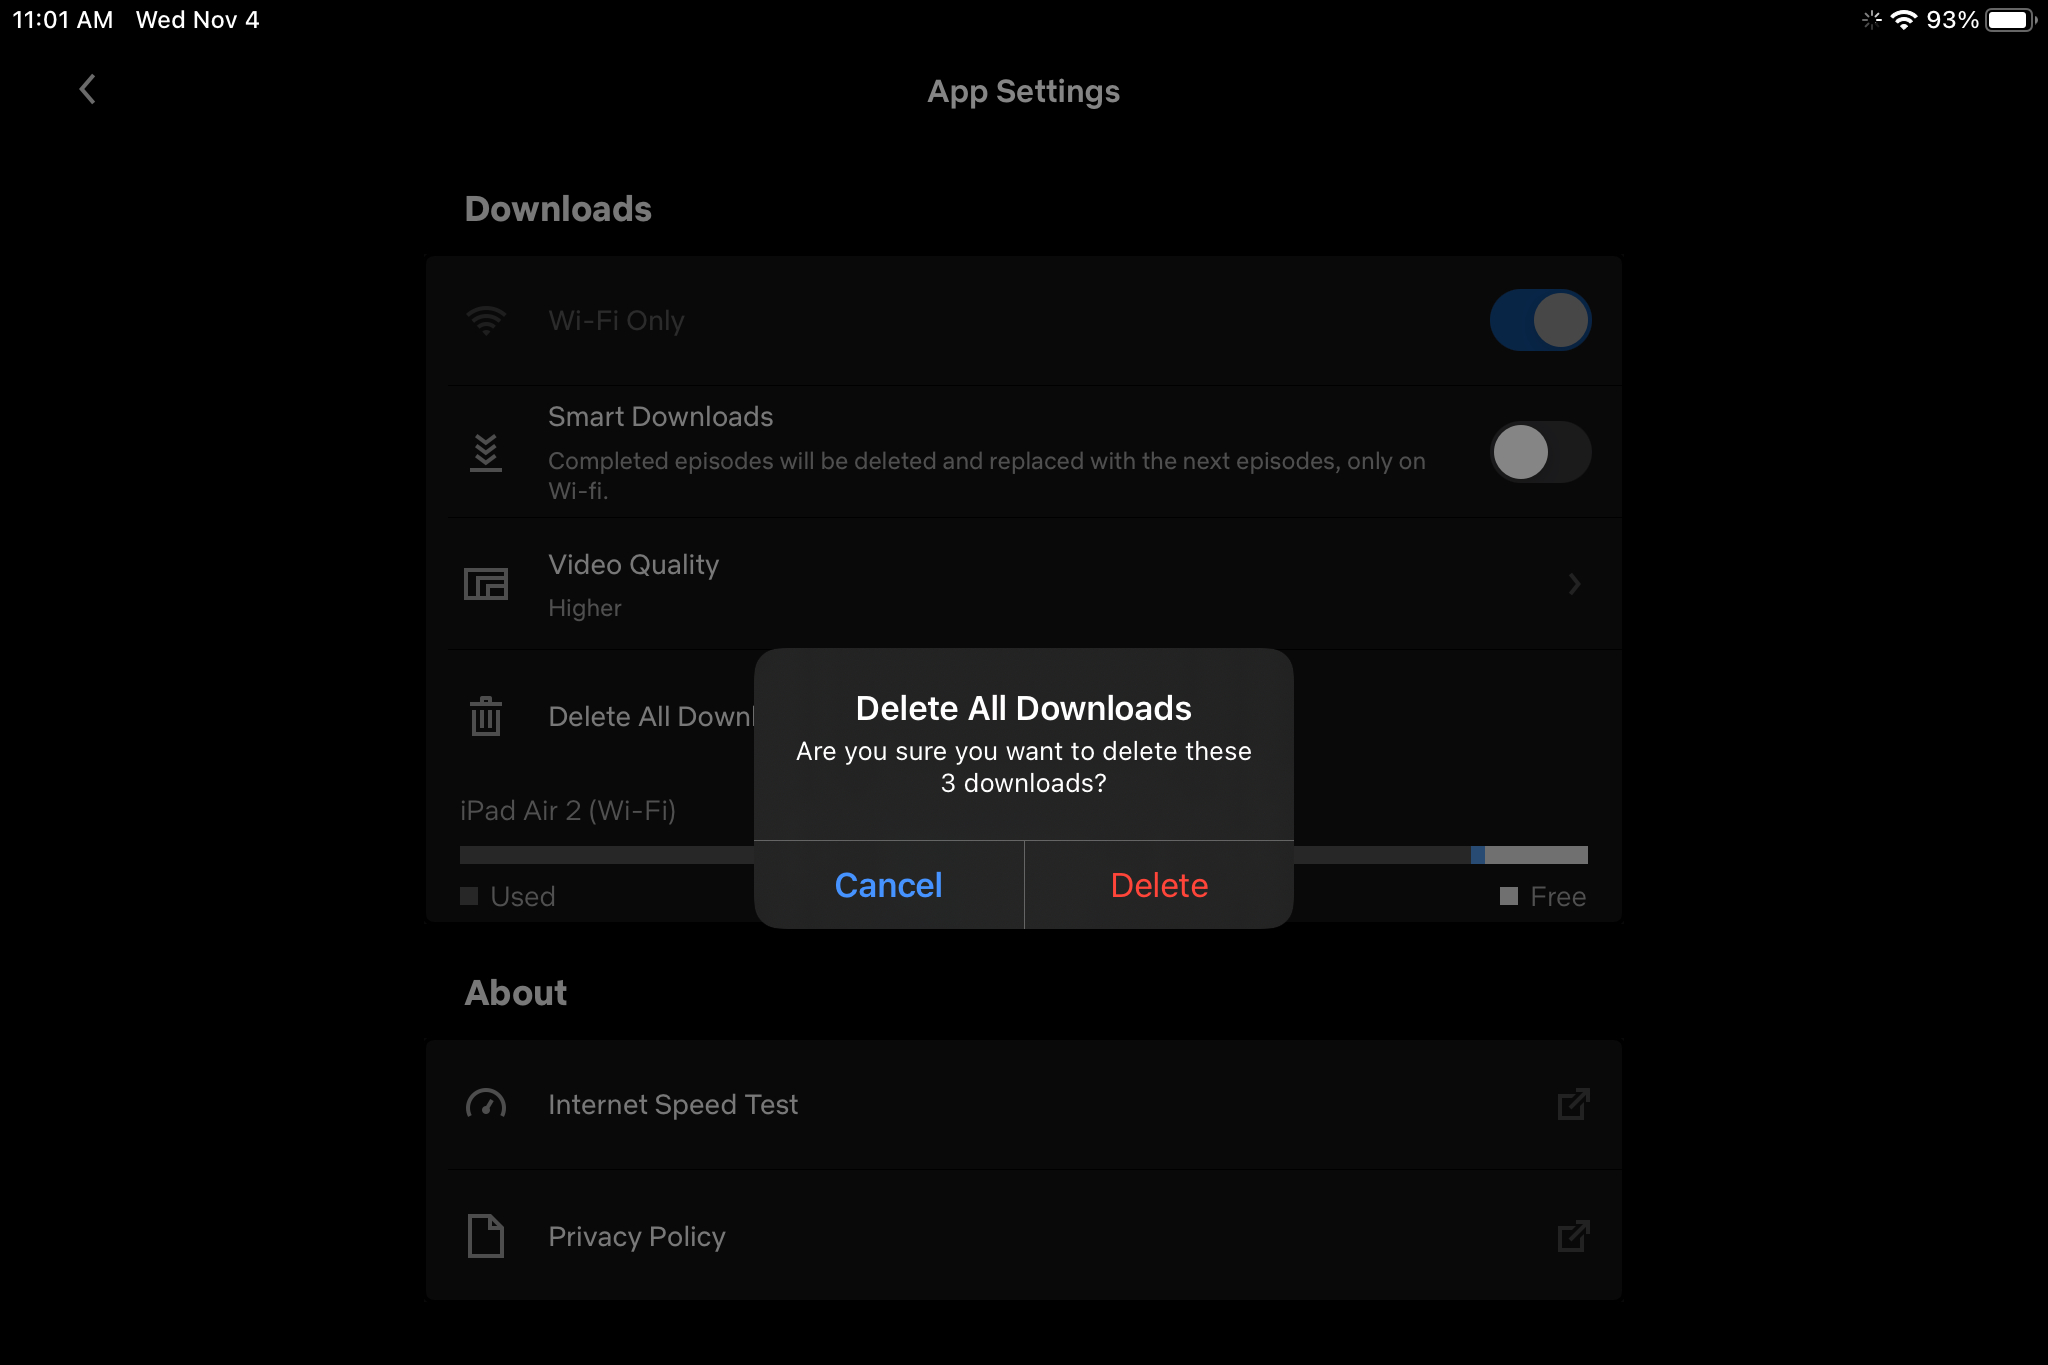 The Delete All Downloads option in Netflix.